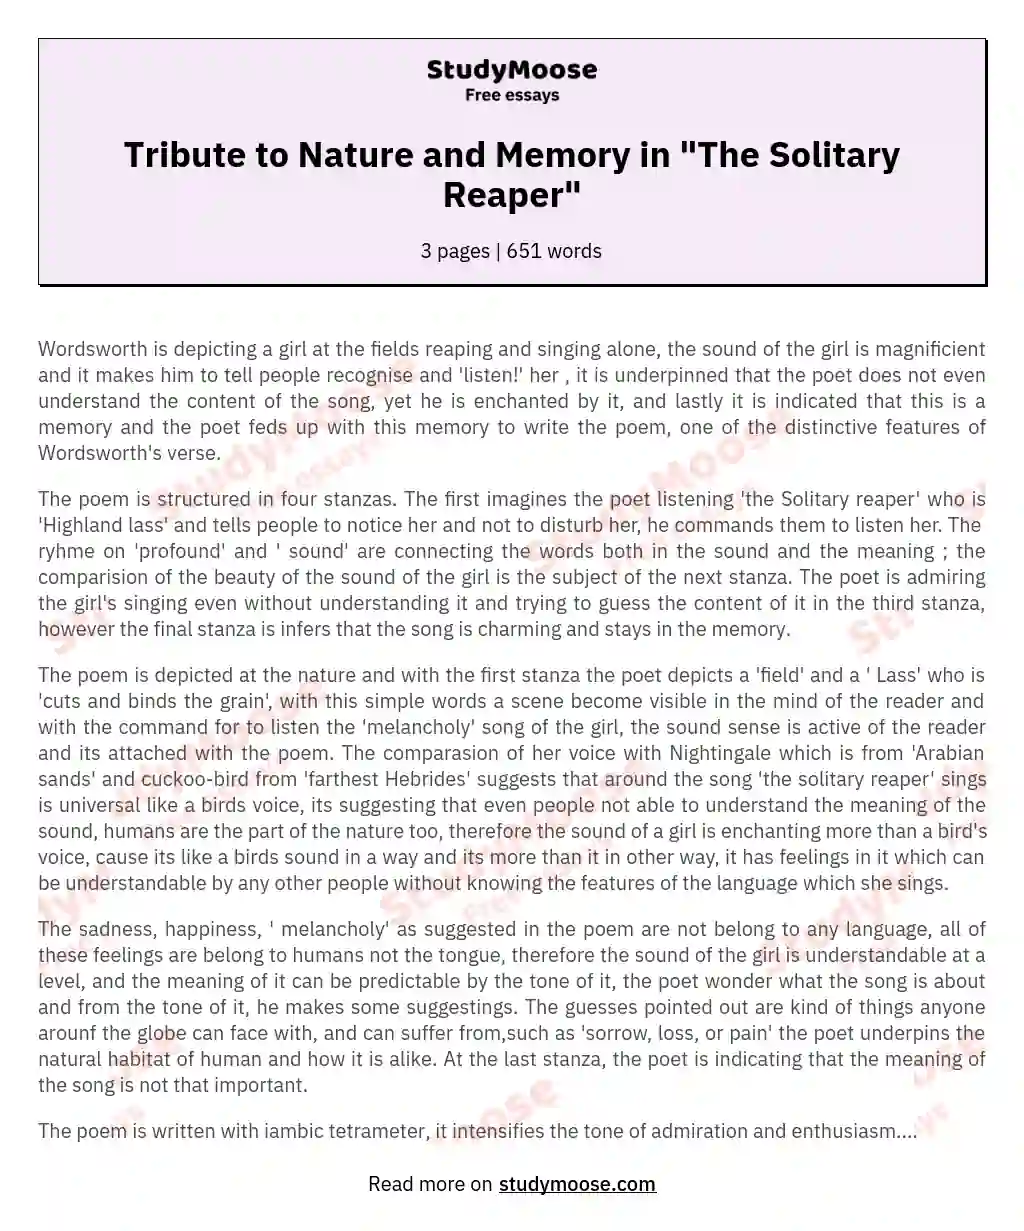 Tribute to Nature and Memory in "The Solitary Reaper" essay